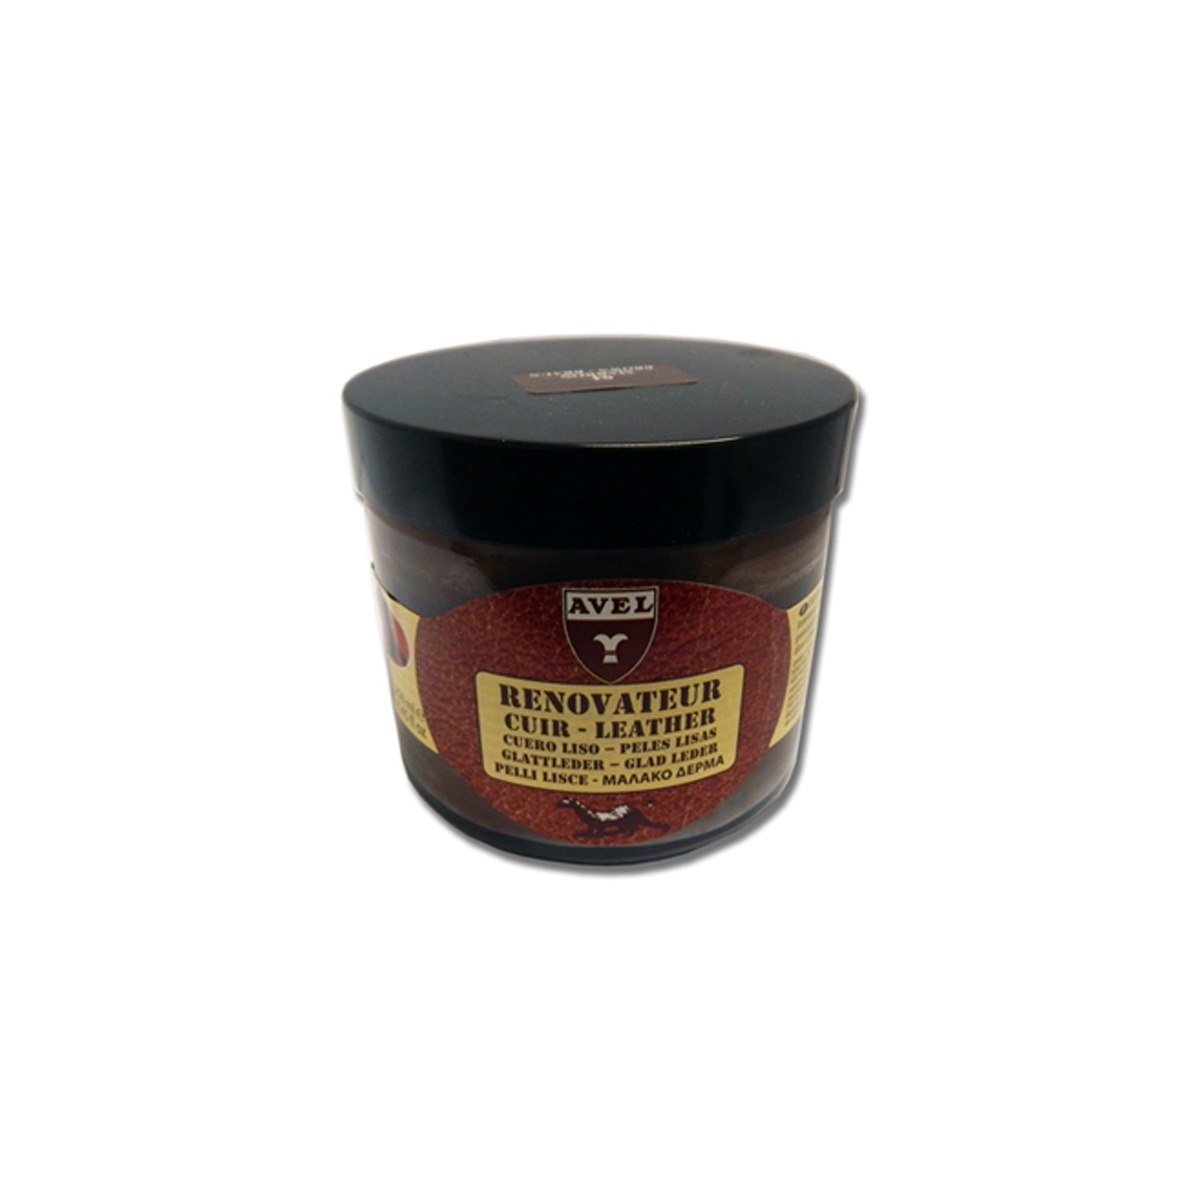 Avel Leather Renovator Recolouring Balm Dark Brown 250ml (Number 5)